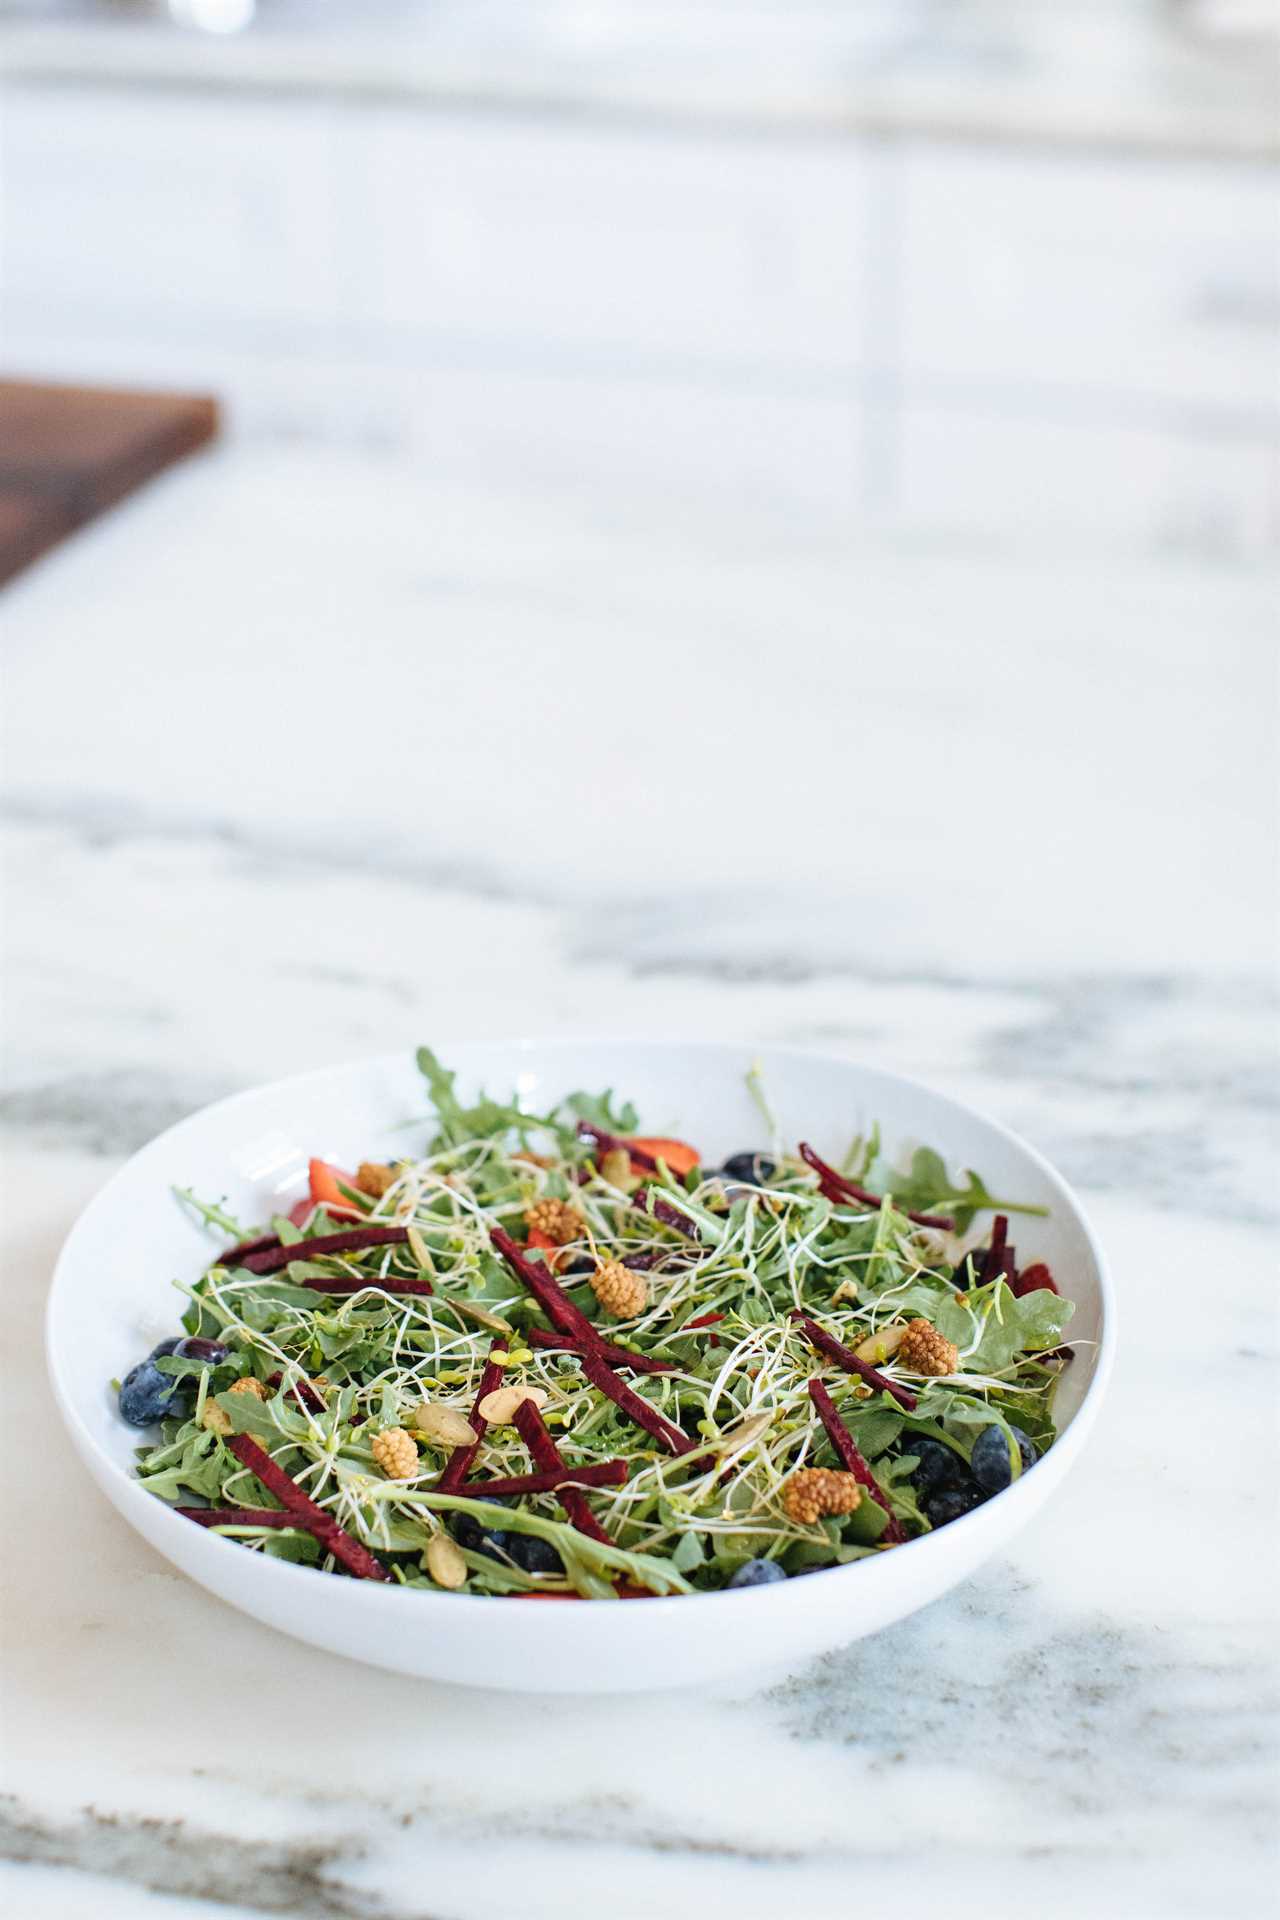 The Antioxidant Salad | Nutrition Stripped